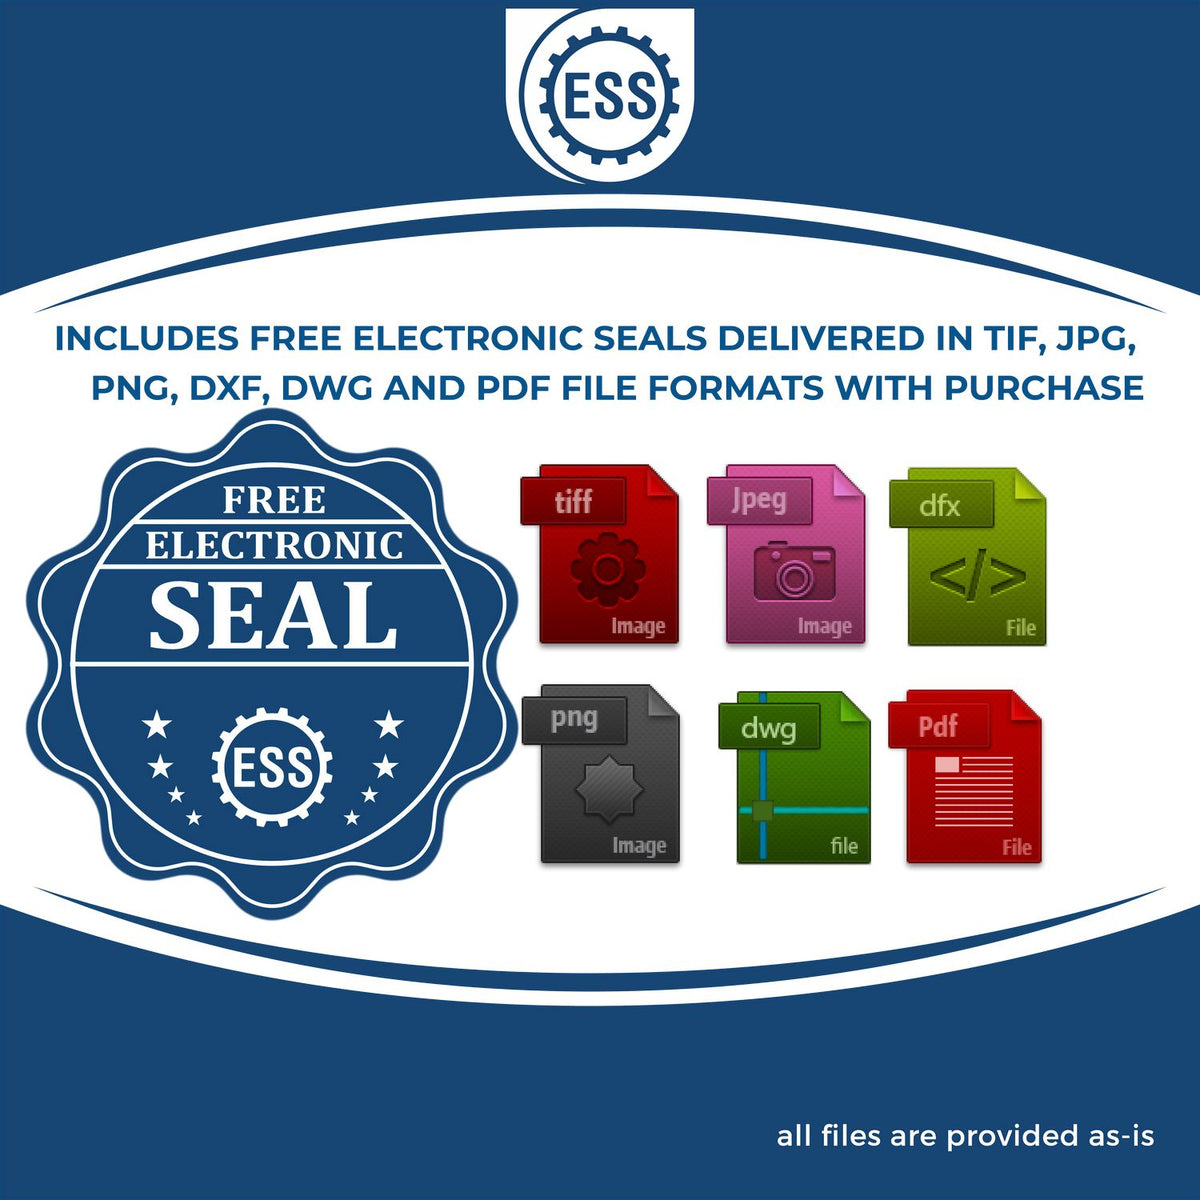 An infographic for the free electronic seal for the Premium MaxLight Pre-Inked Kentucky Engineering Stamp illustrating the different file type icons such as DXF, DWG, TIF, JPG and PNG.